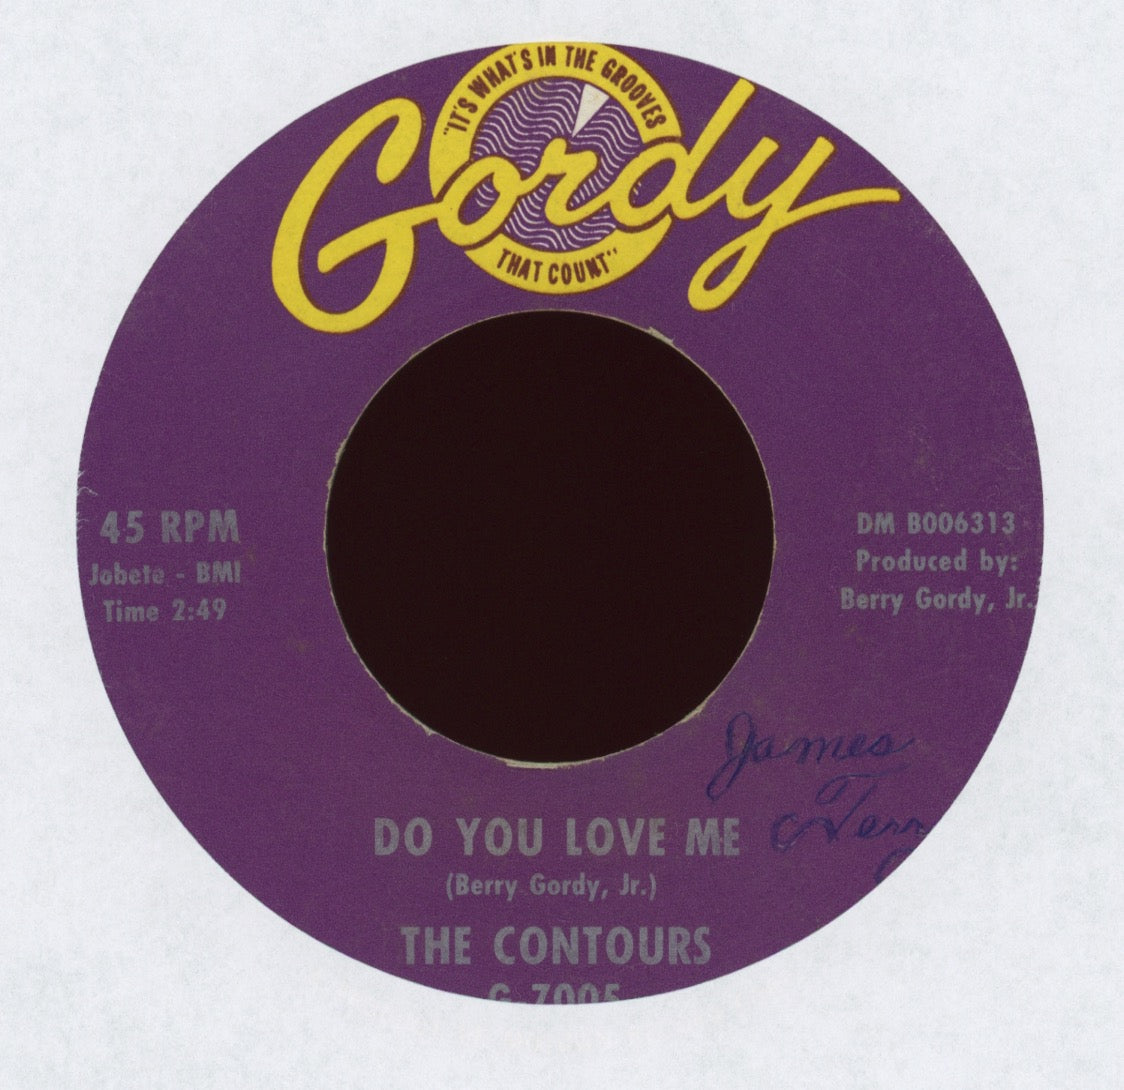 The Contours - Do You Love Me on Gordy